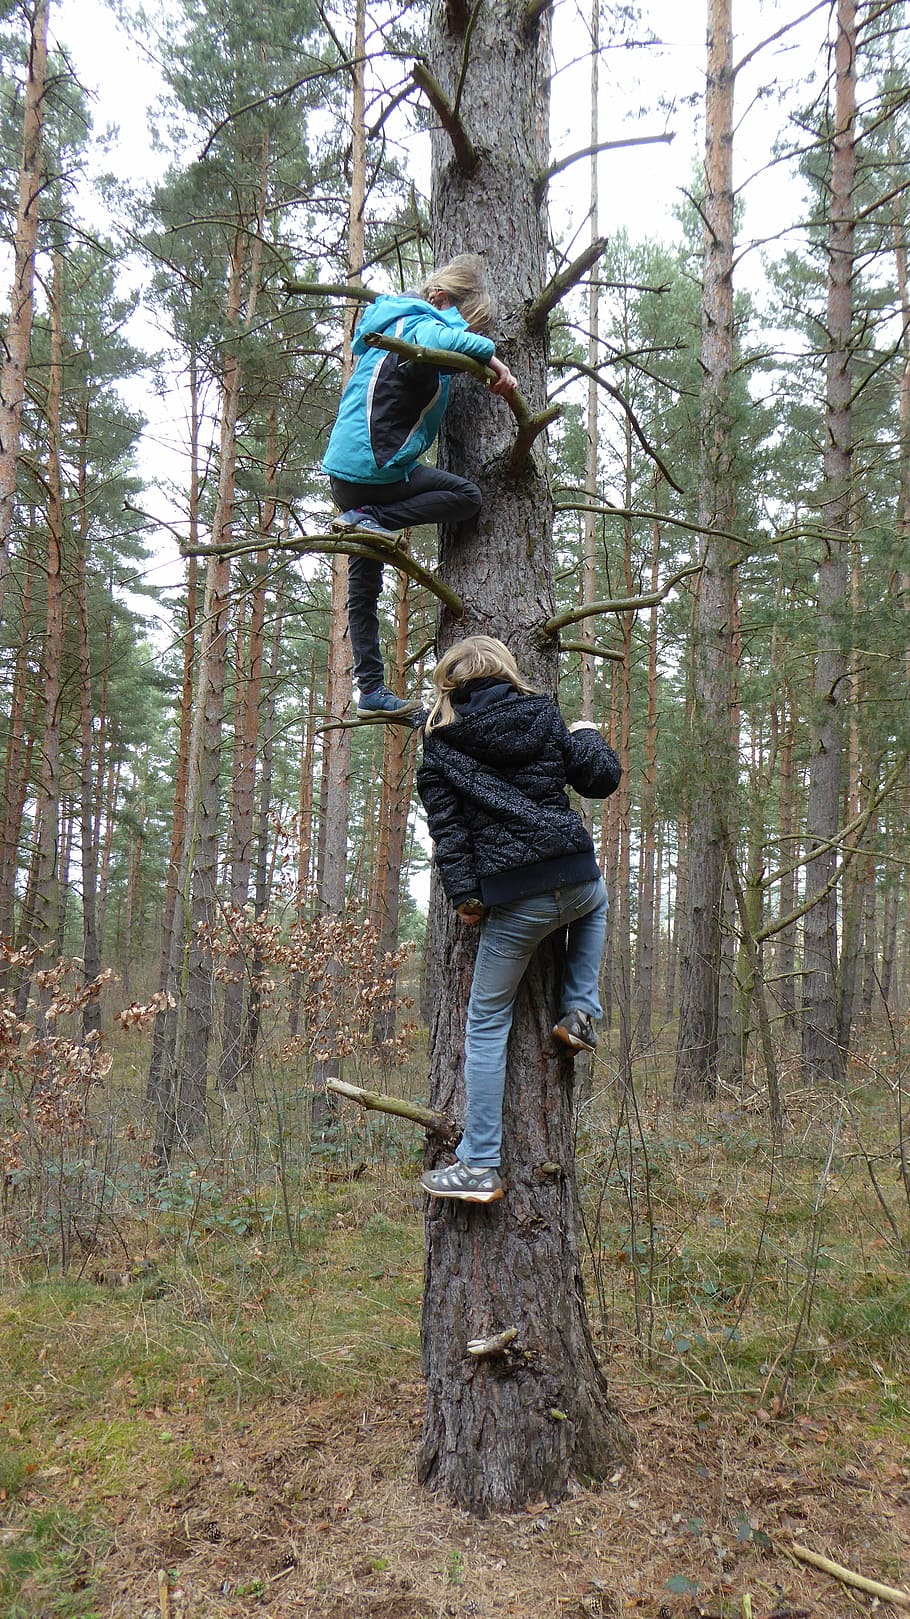 children, climb, forest, play, leisure, nature, climbing, fun, dom, recovery